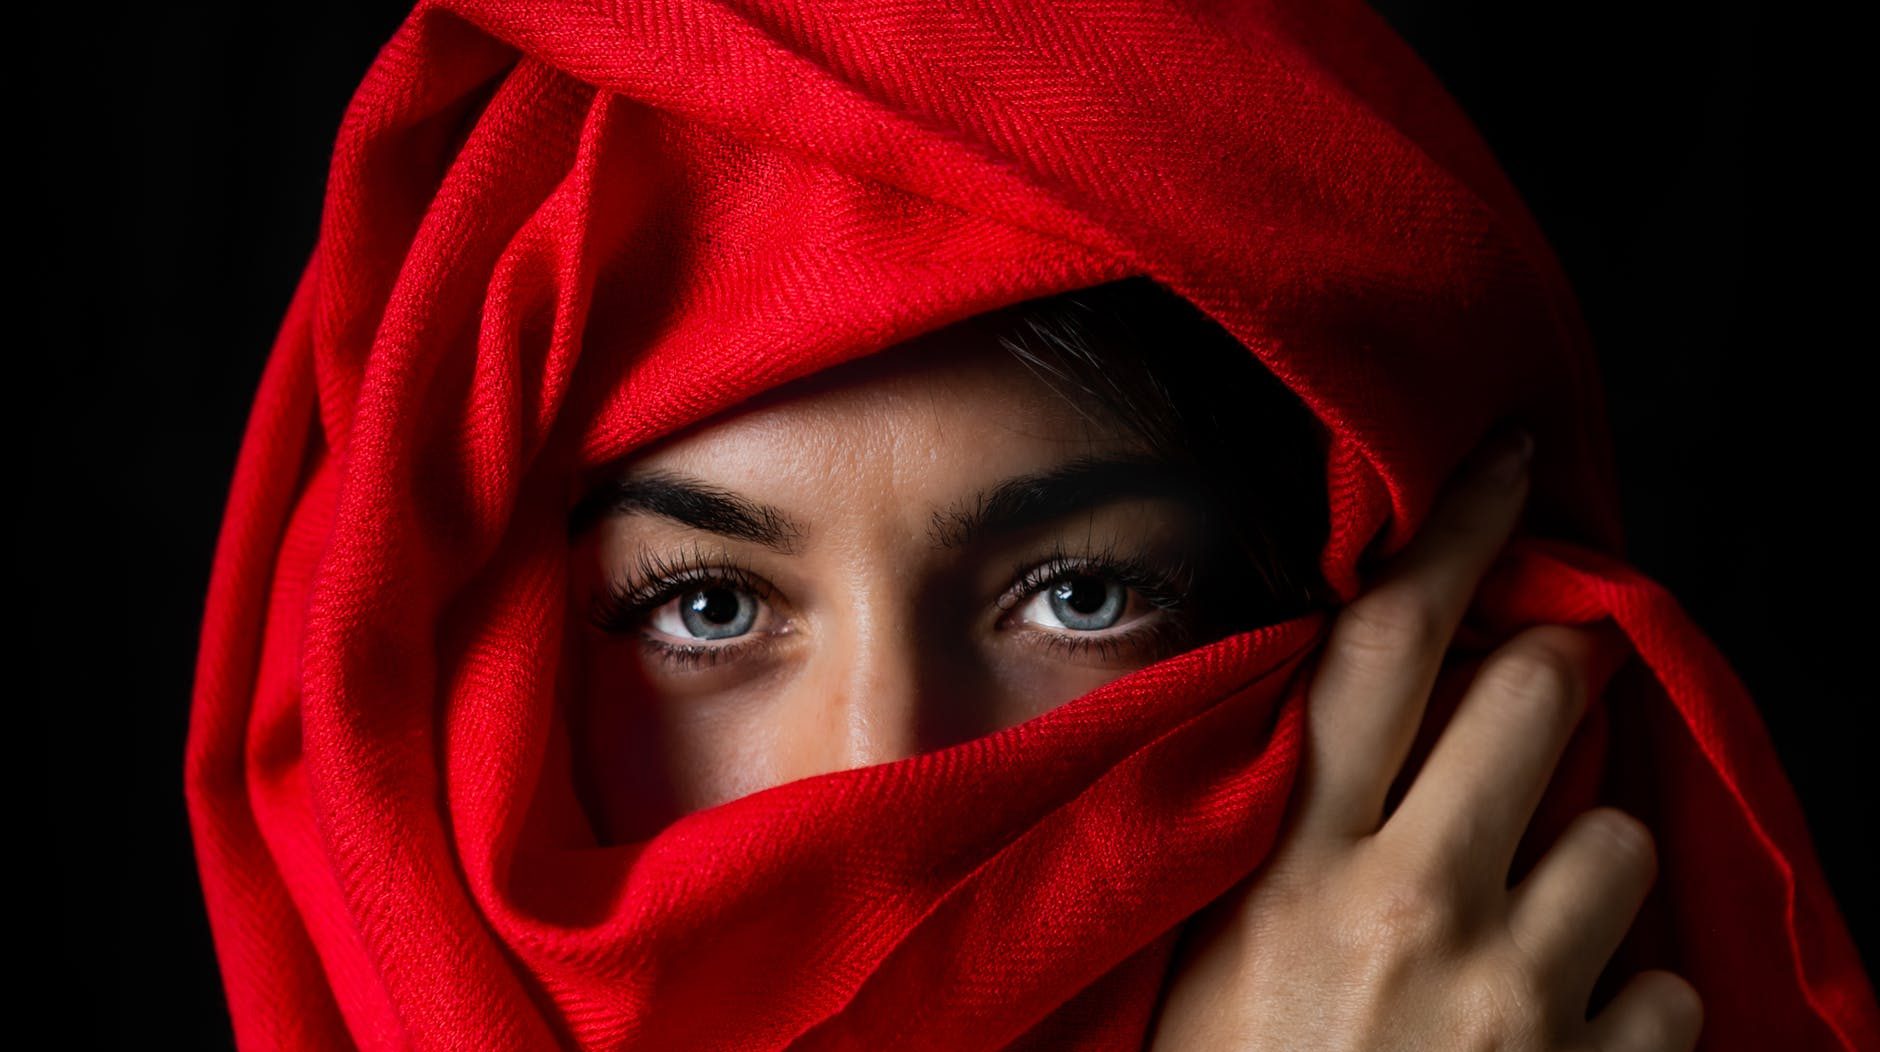 photo of person covered by red headscarf